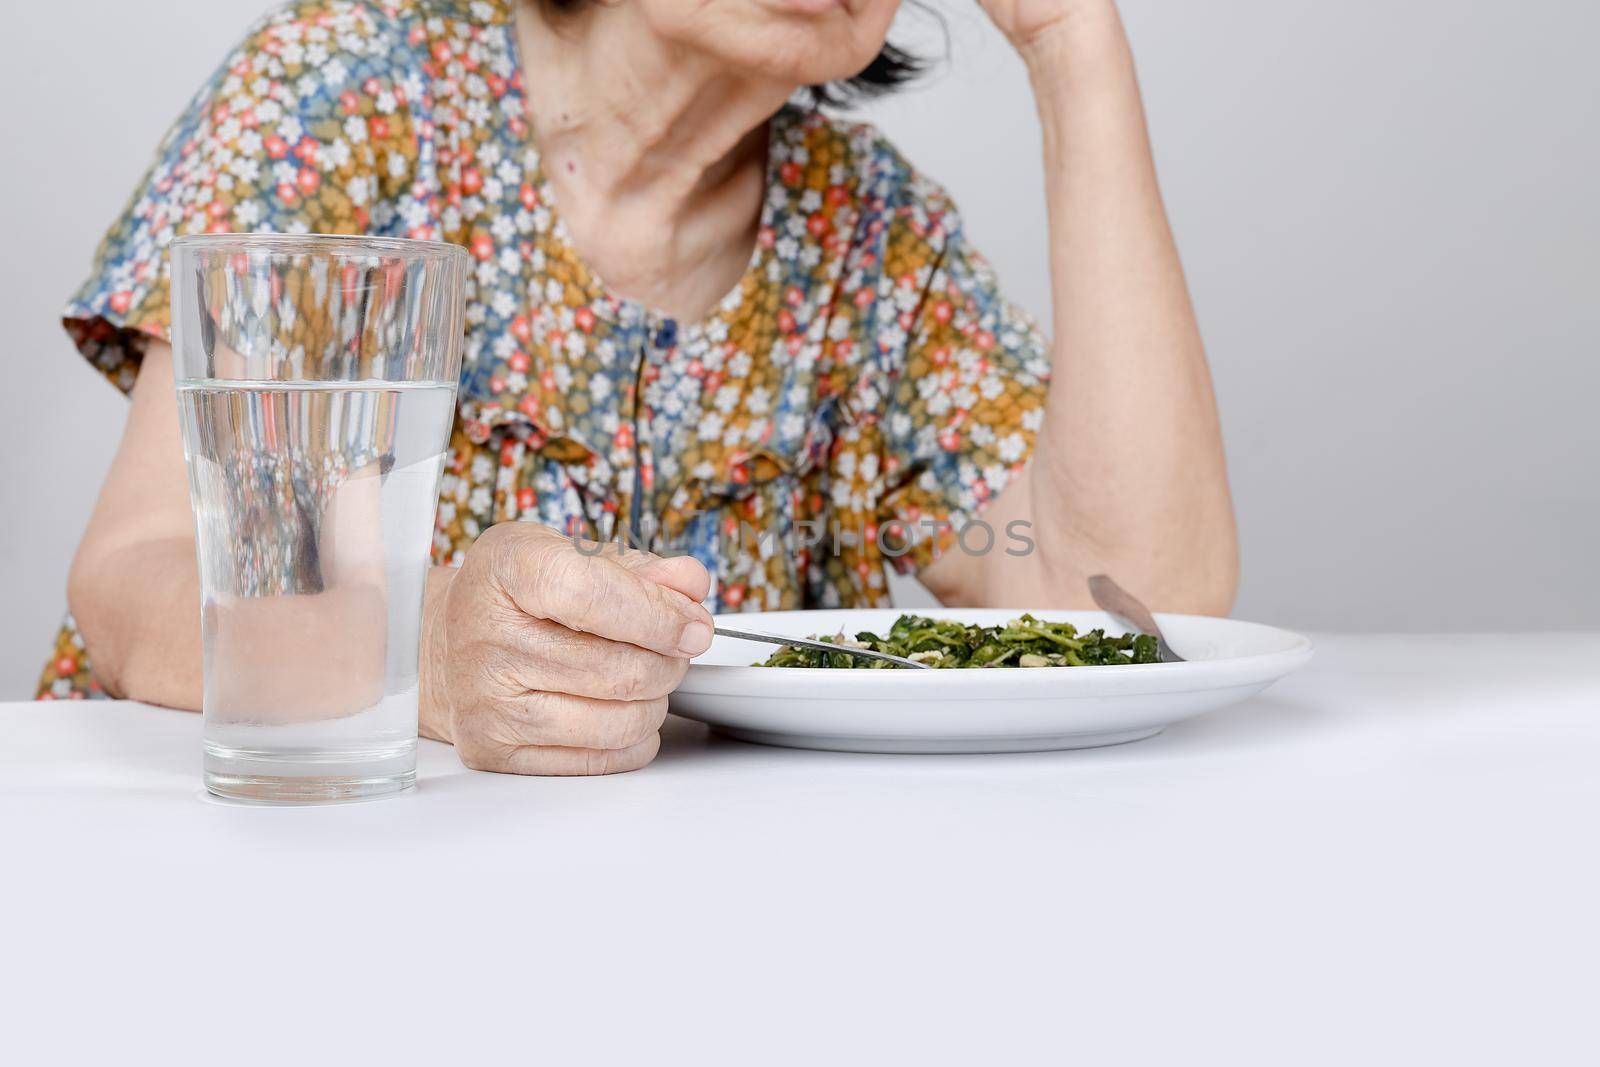 Elderly asian woman bored with food